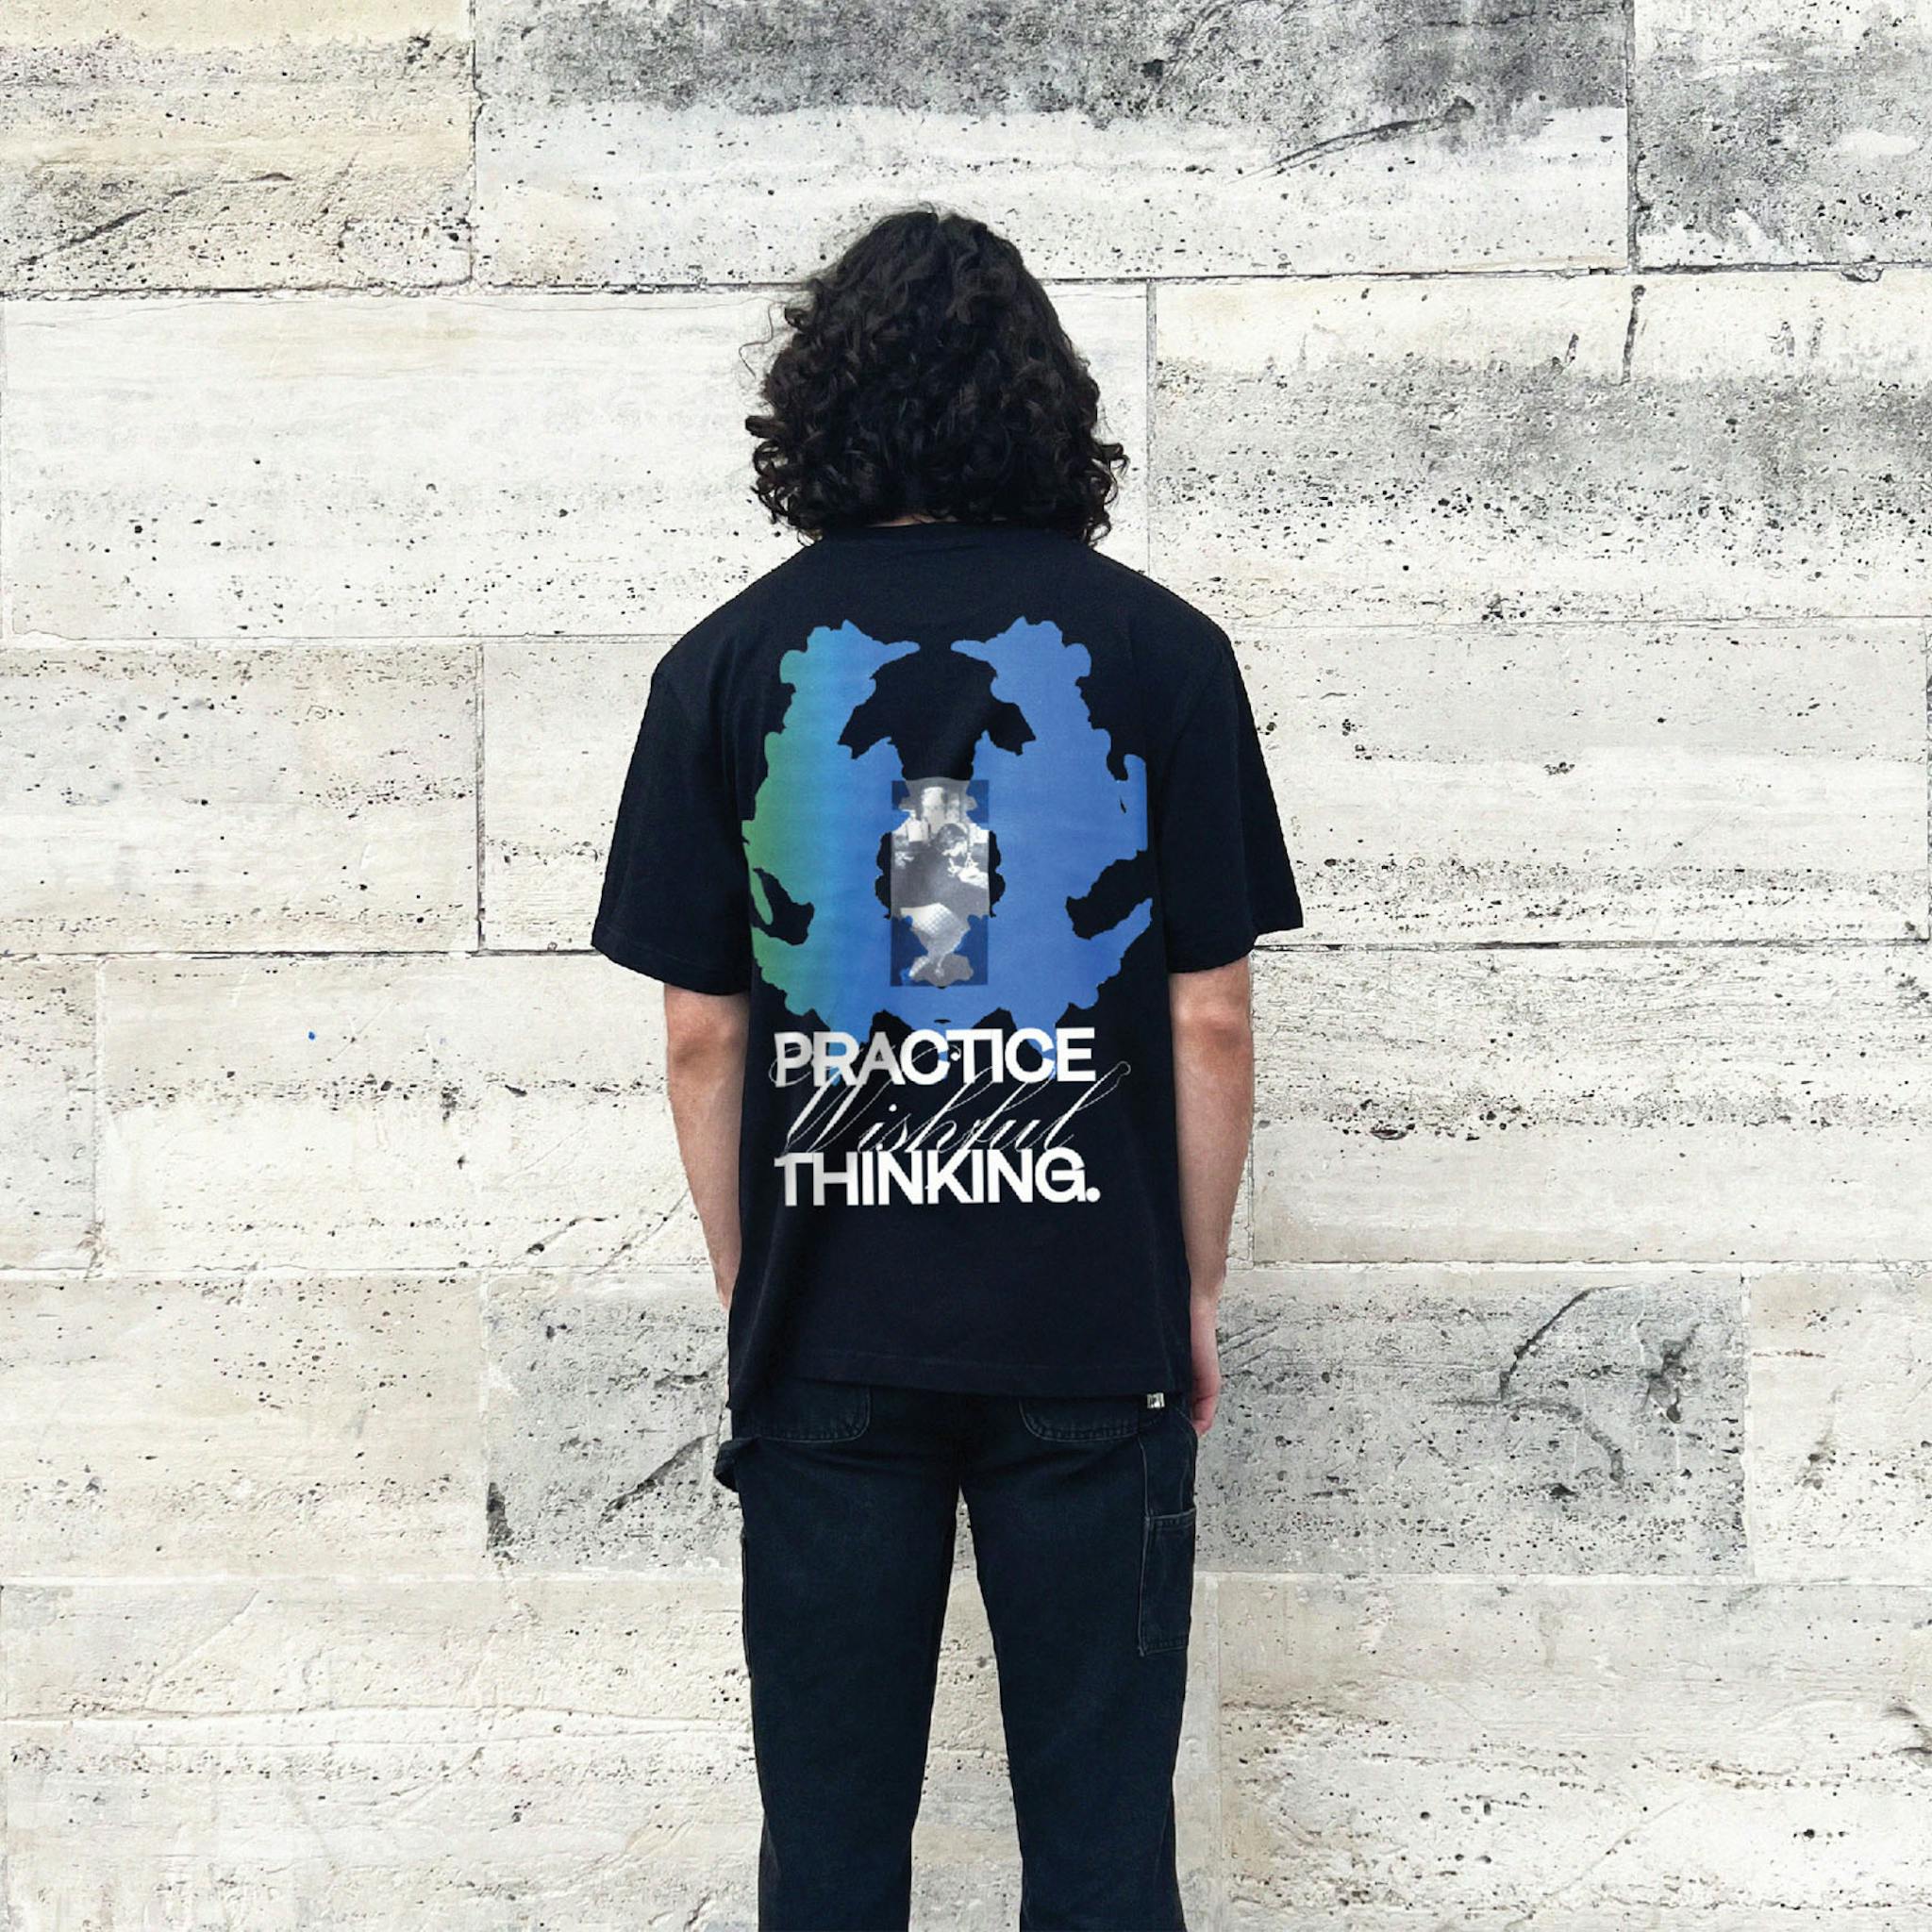 A man with long dark hair wearing black T-shirt with a large blue and green graphic and text on the back saying "Practice Wishful Thinking"